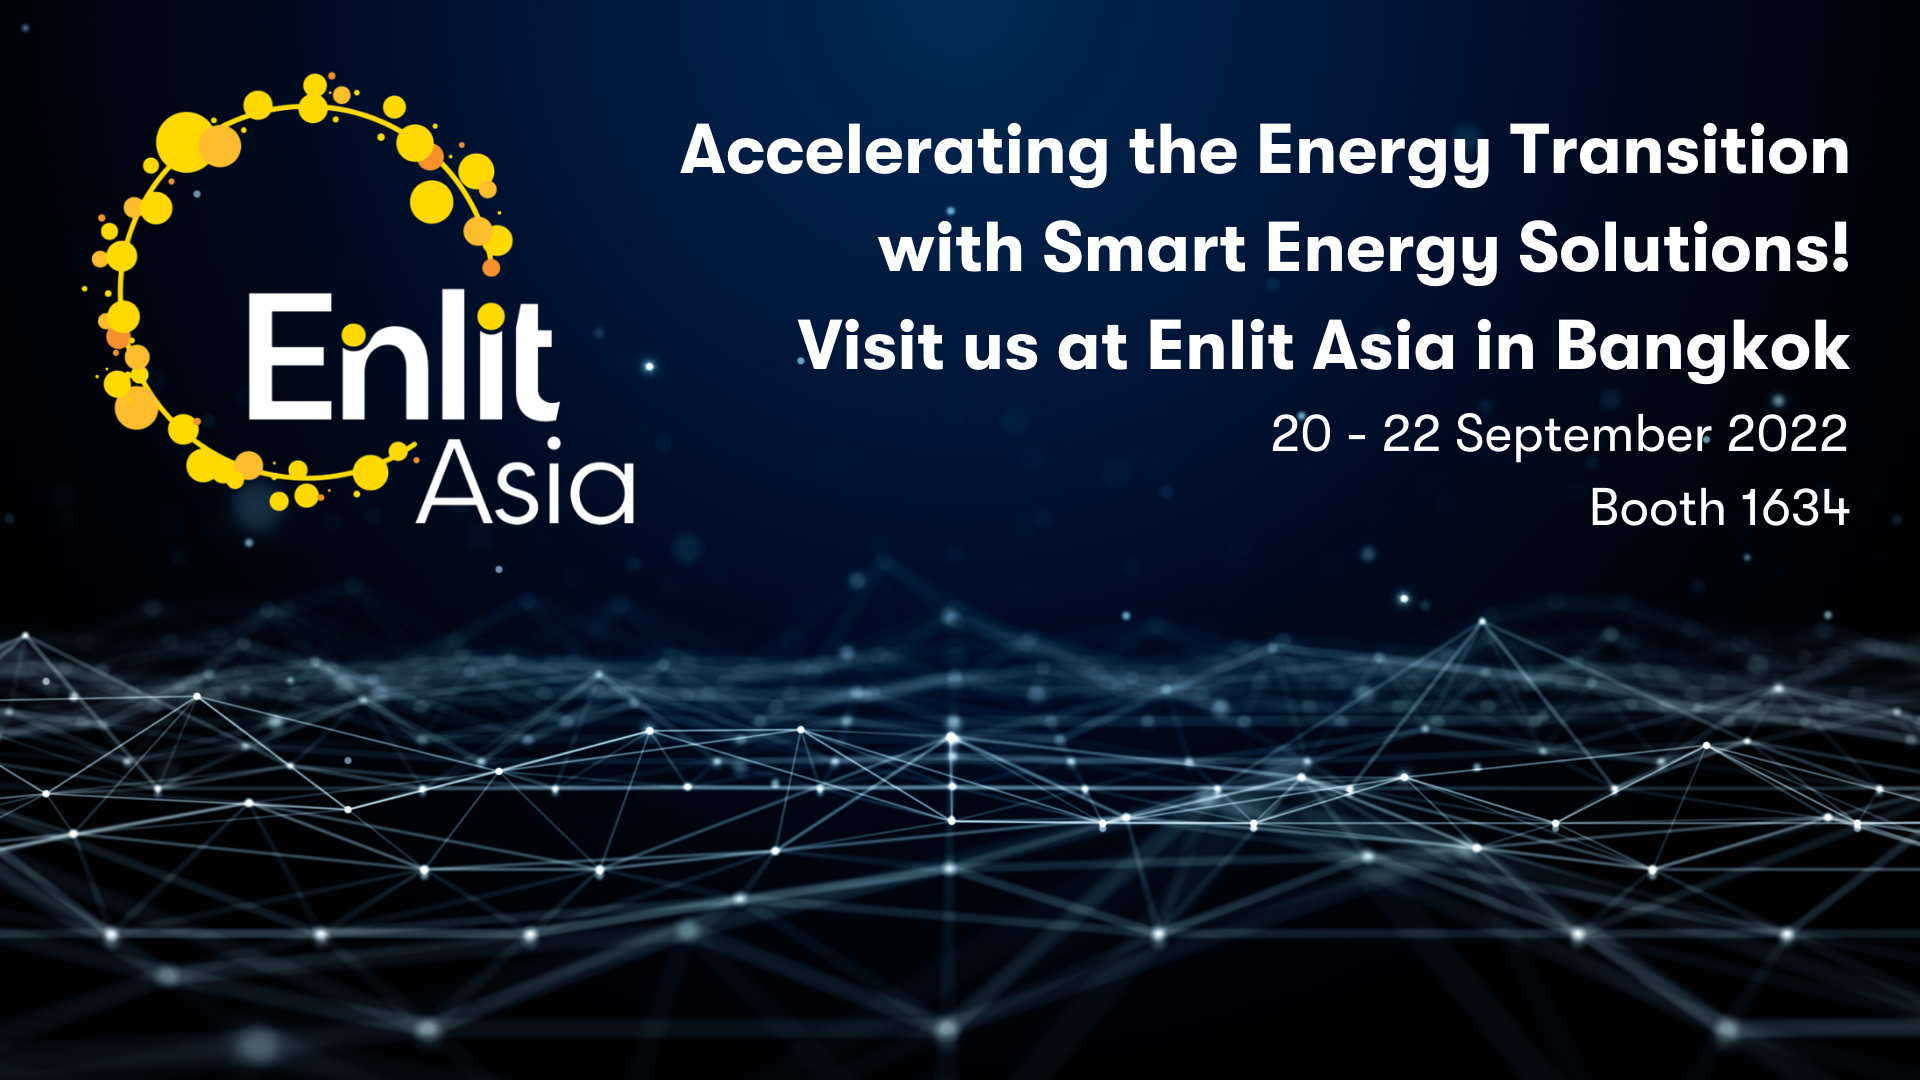 uploads/pics/https://systemtechnologies.iqony.energy/uploads/pics/Accelerating_the_Energy_Transition_with_Smart_Digital_Solutions_Visit_us_at_Enlit_Asia_in_Bangkok__1__04.png